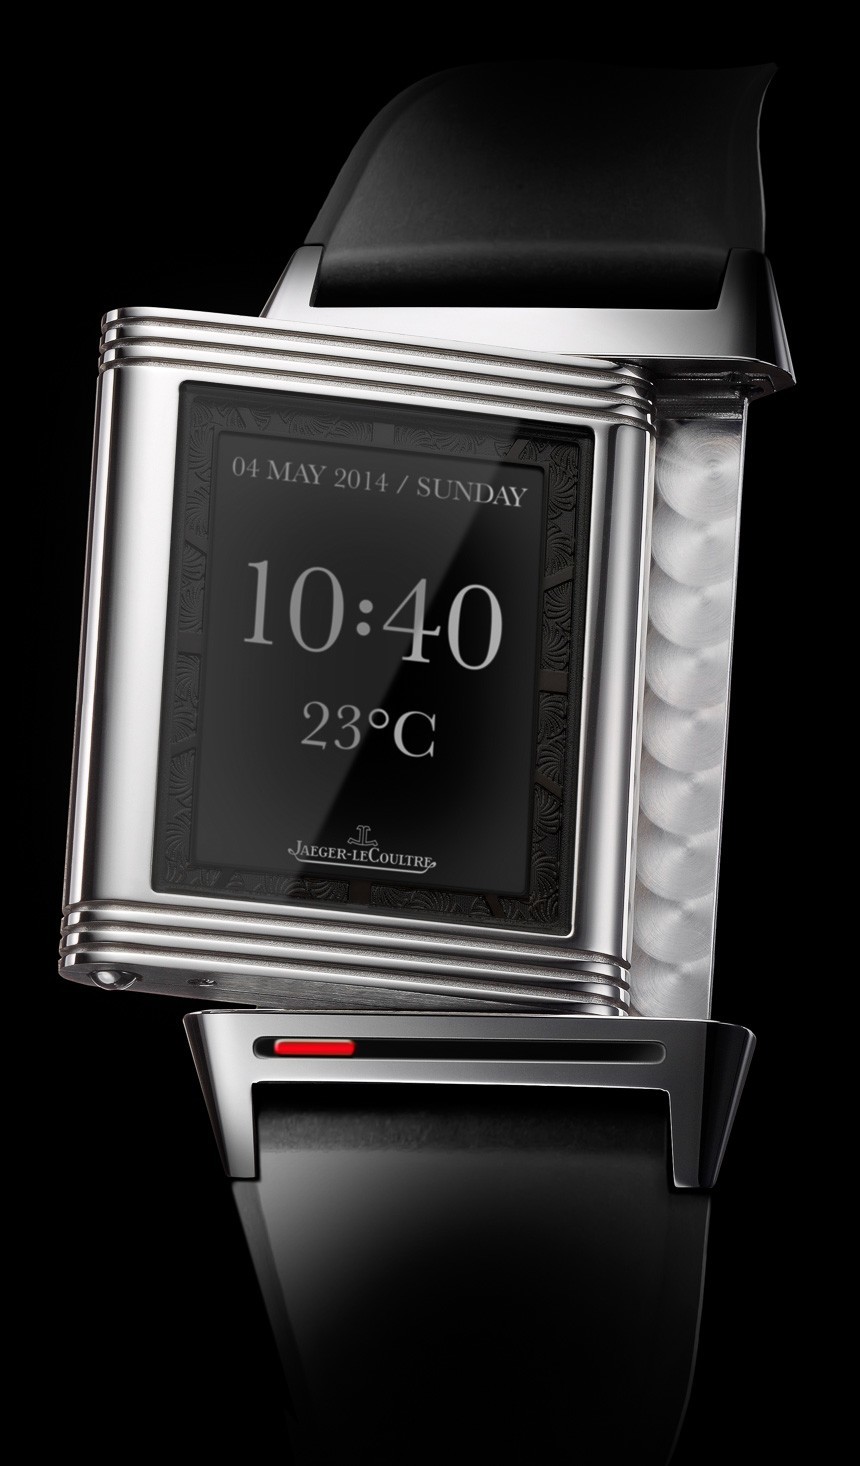 3 Concept Smartwatches That Could Be Popular Swiss Luxury Brands | aBlogtoWatch